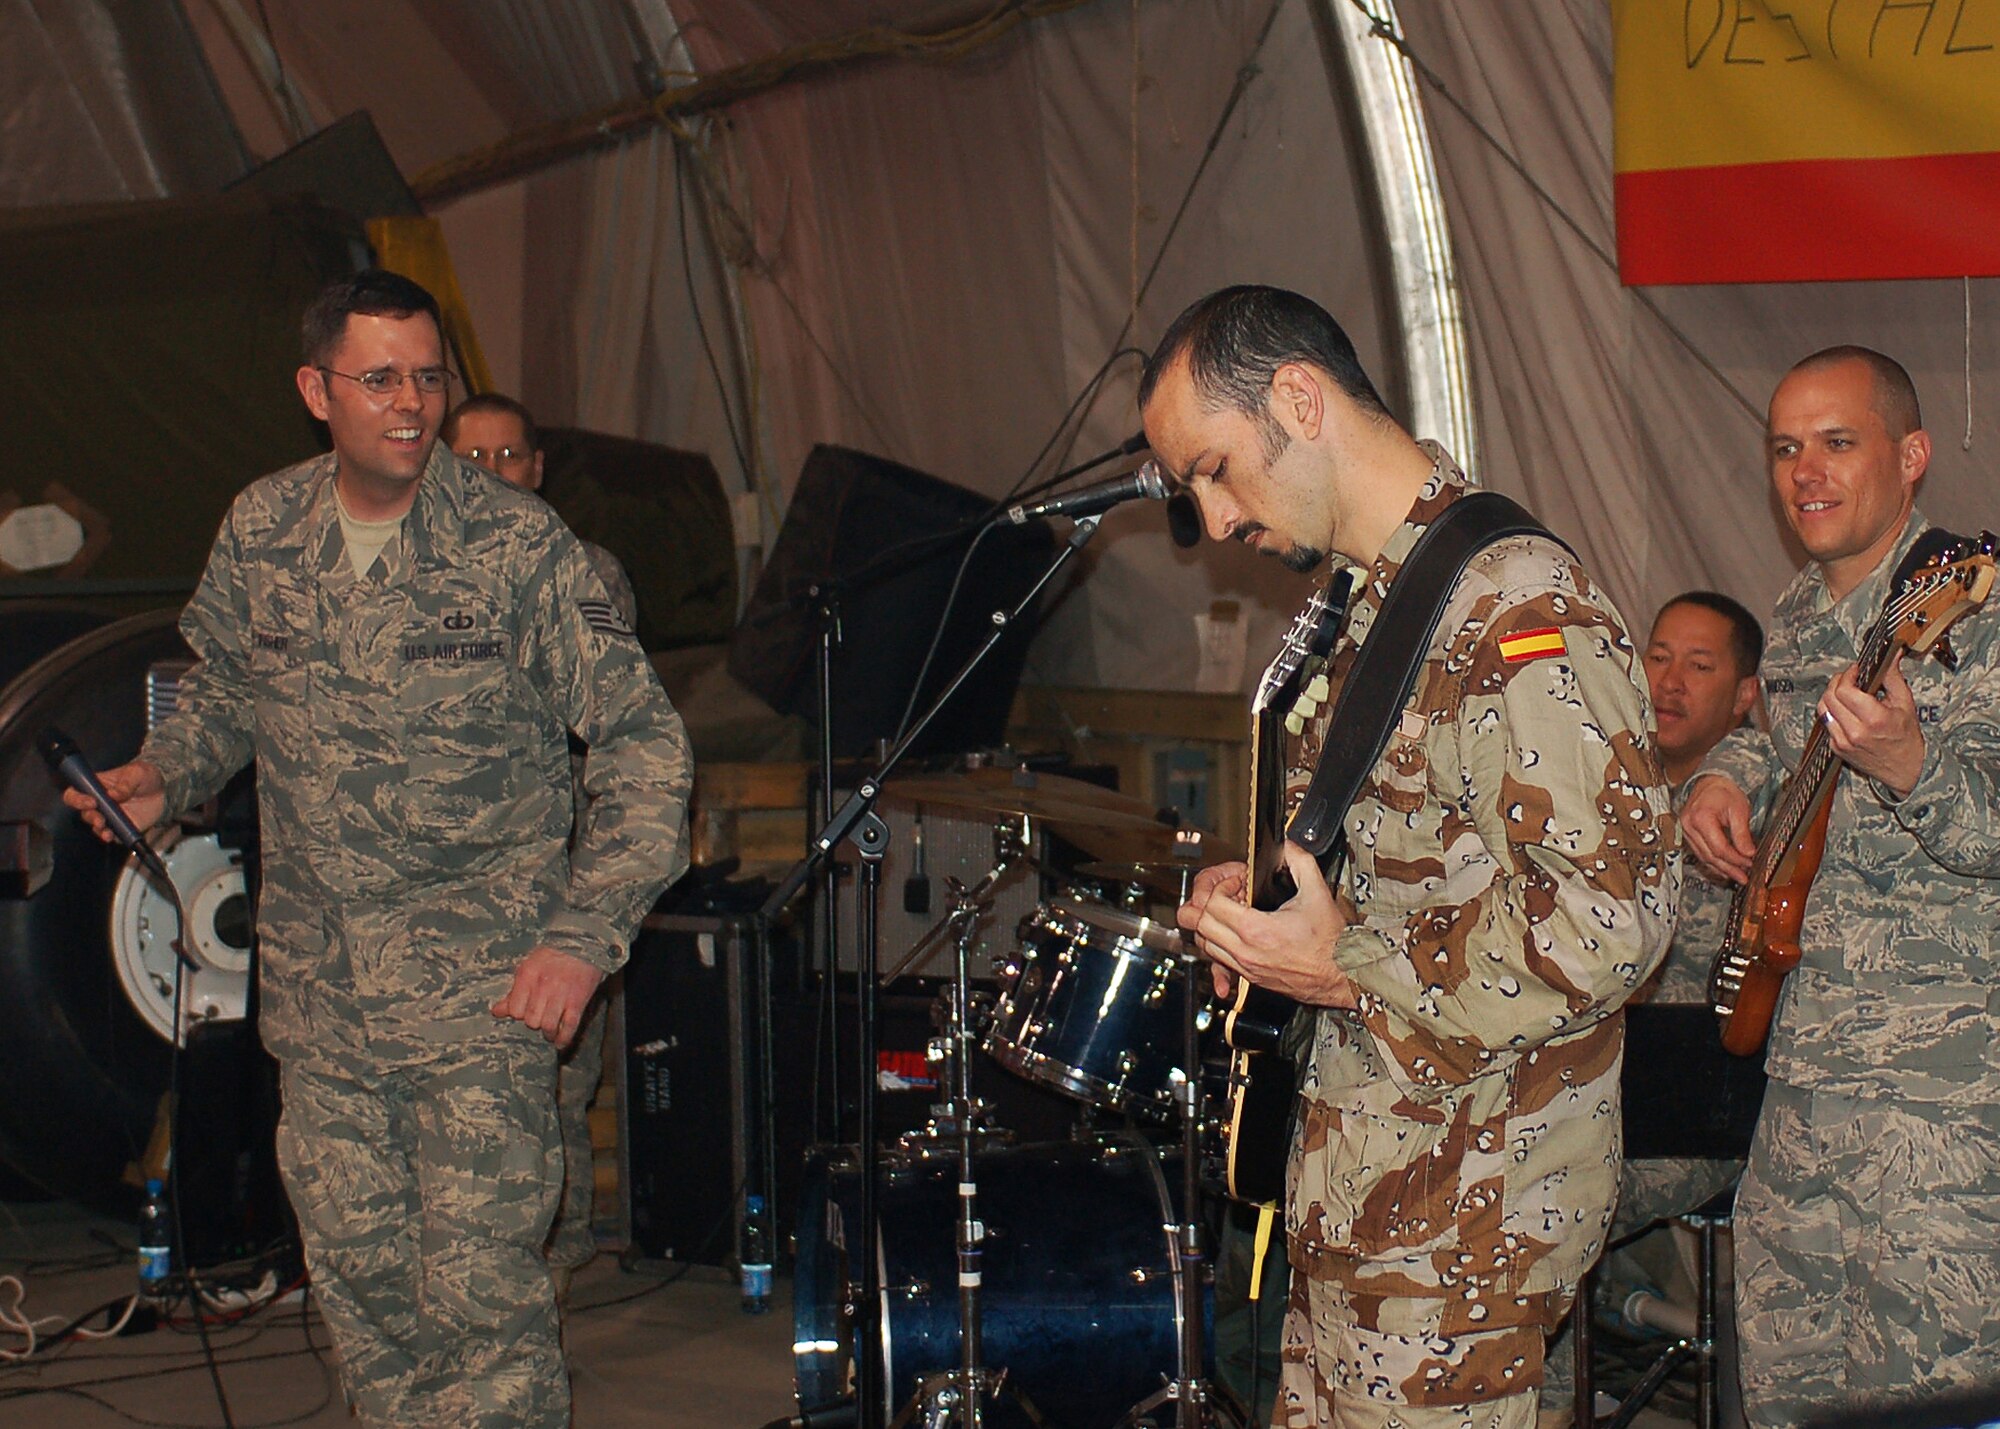 Spanish Air Force member, 2nd Lt. Javier Roa, plays as guest guitarist for the band Sirocco, during the U.S. Air Forces Central Expeditionary Band's last performance March 21 at Manas Air Base, Kyrgyzstan. Sirocco members are deployed to Southwest Asia from the U.S. Air Forces in Europe Band at Sembach AB, Germany. Lieutenant Roa is coalition forces C-130 pilot deployed to Manas from Zaragoza, Spain. (U.S. Air Force photo/Tech. Sgt. Elizabeth Weinberg)